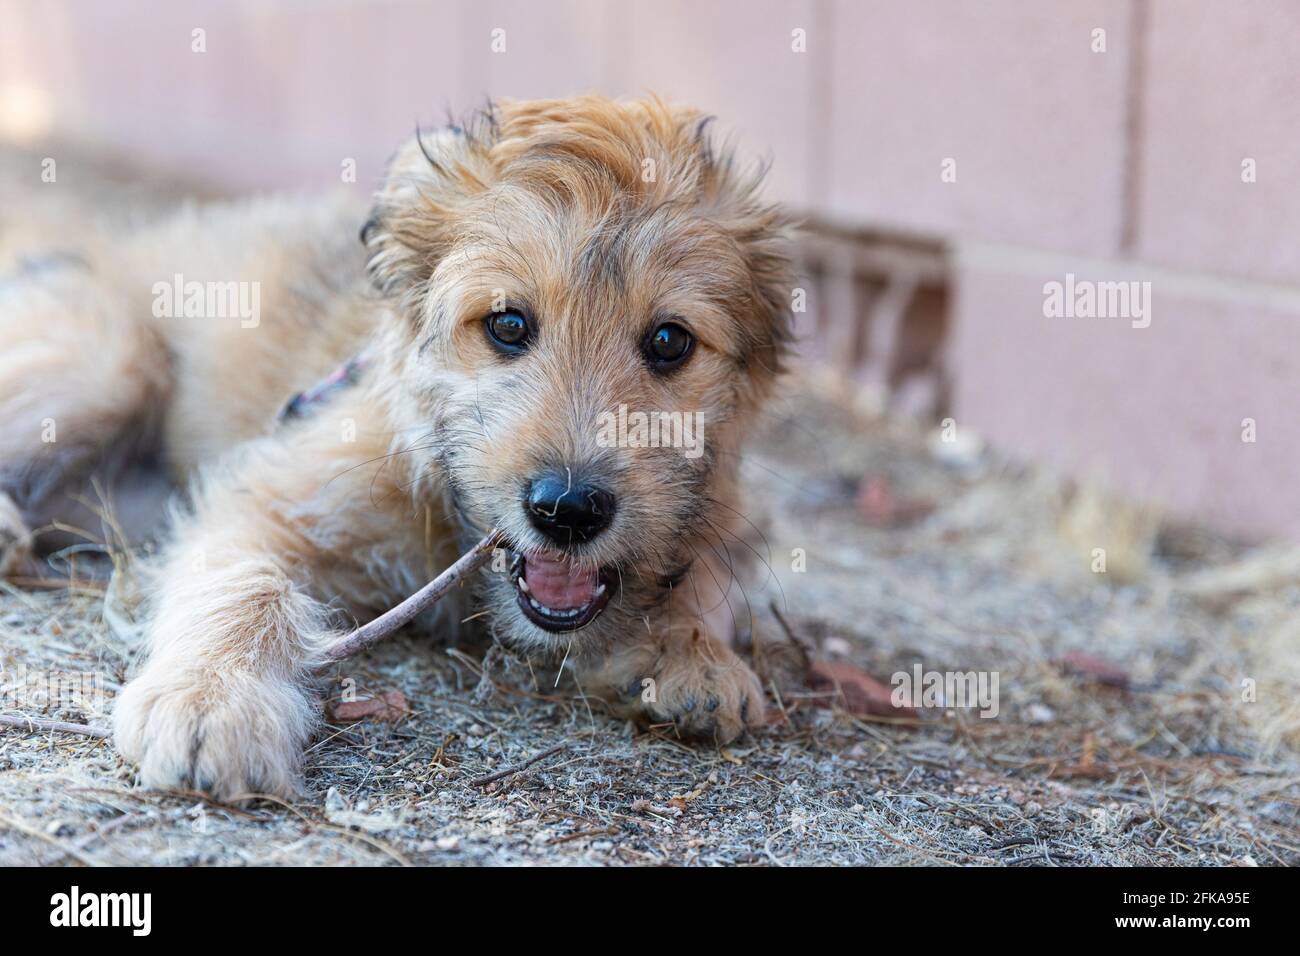 Cute pupy chewing on a stick Stock Photo